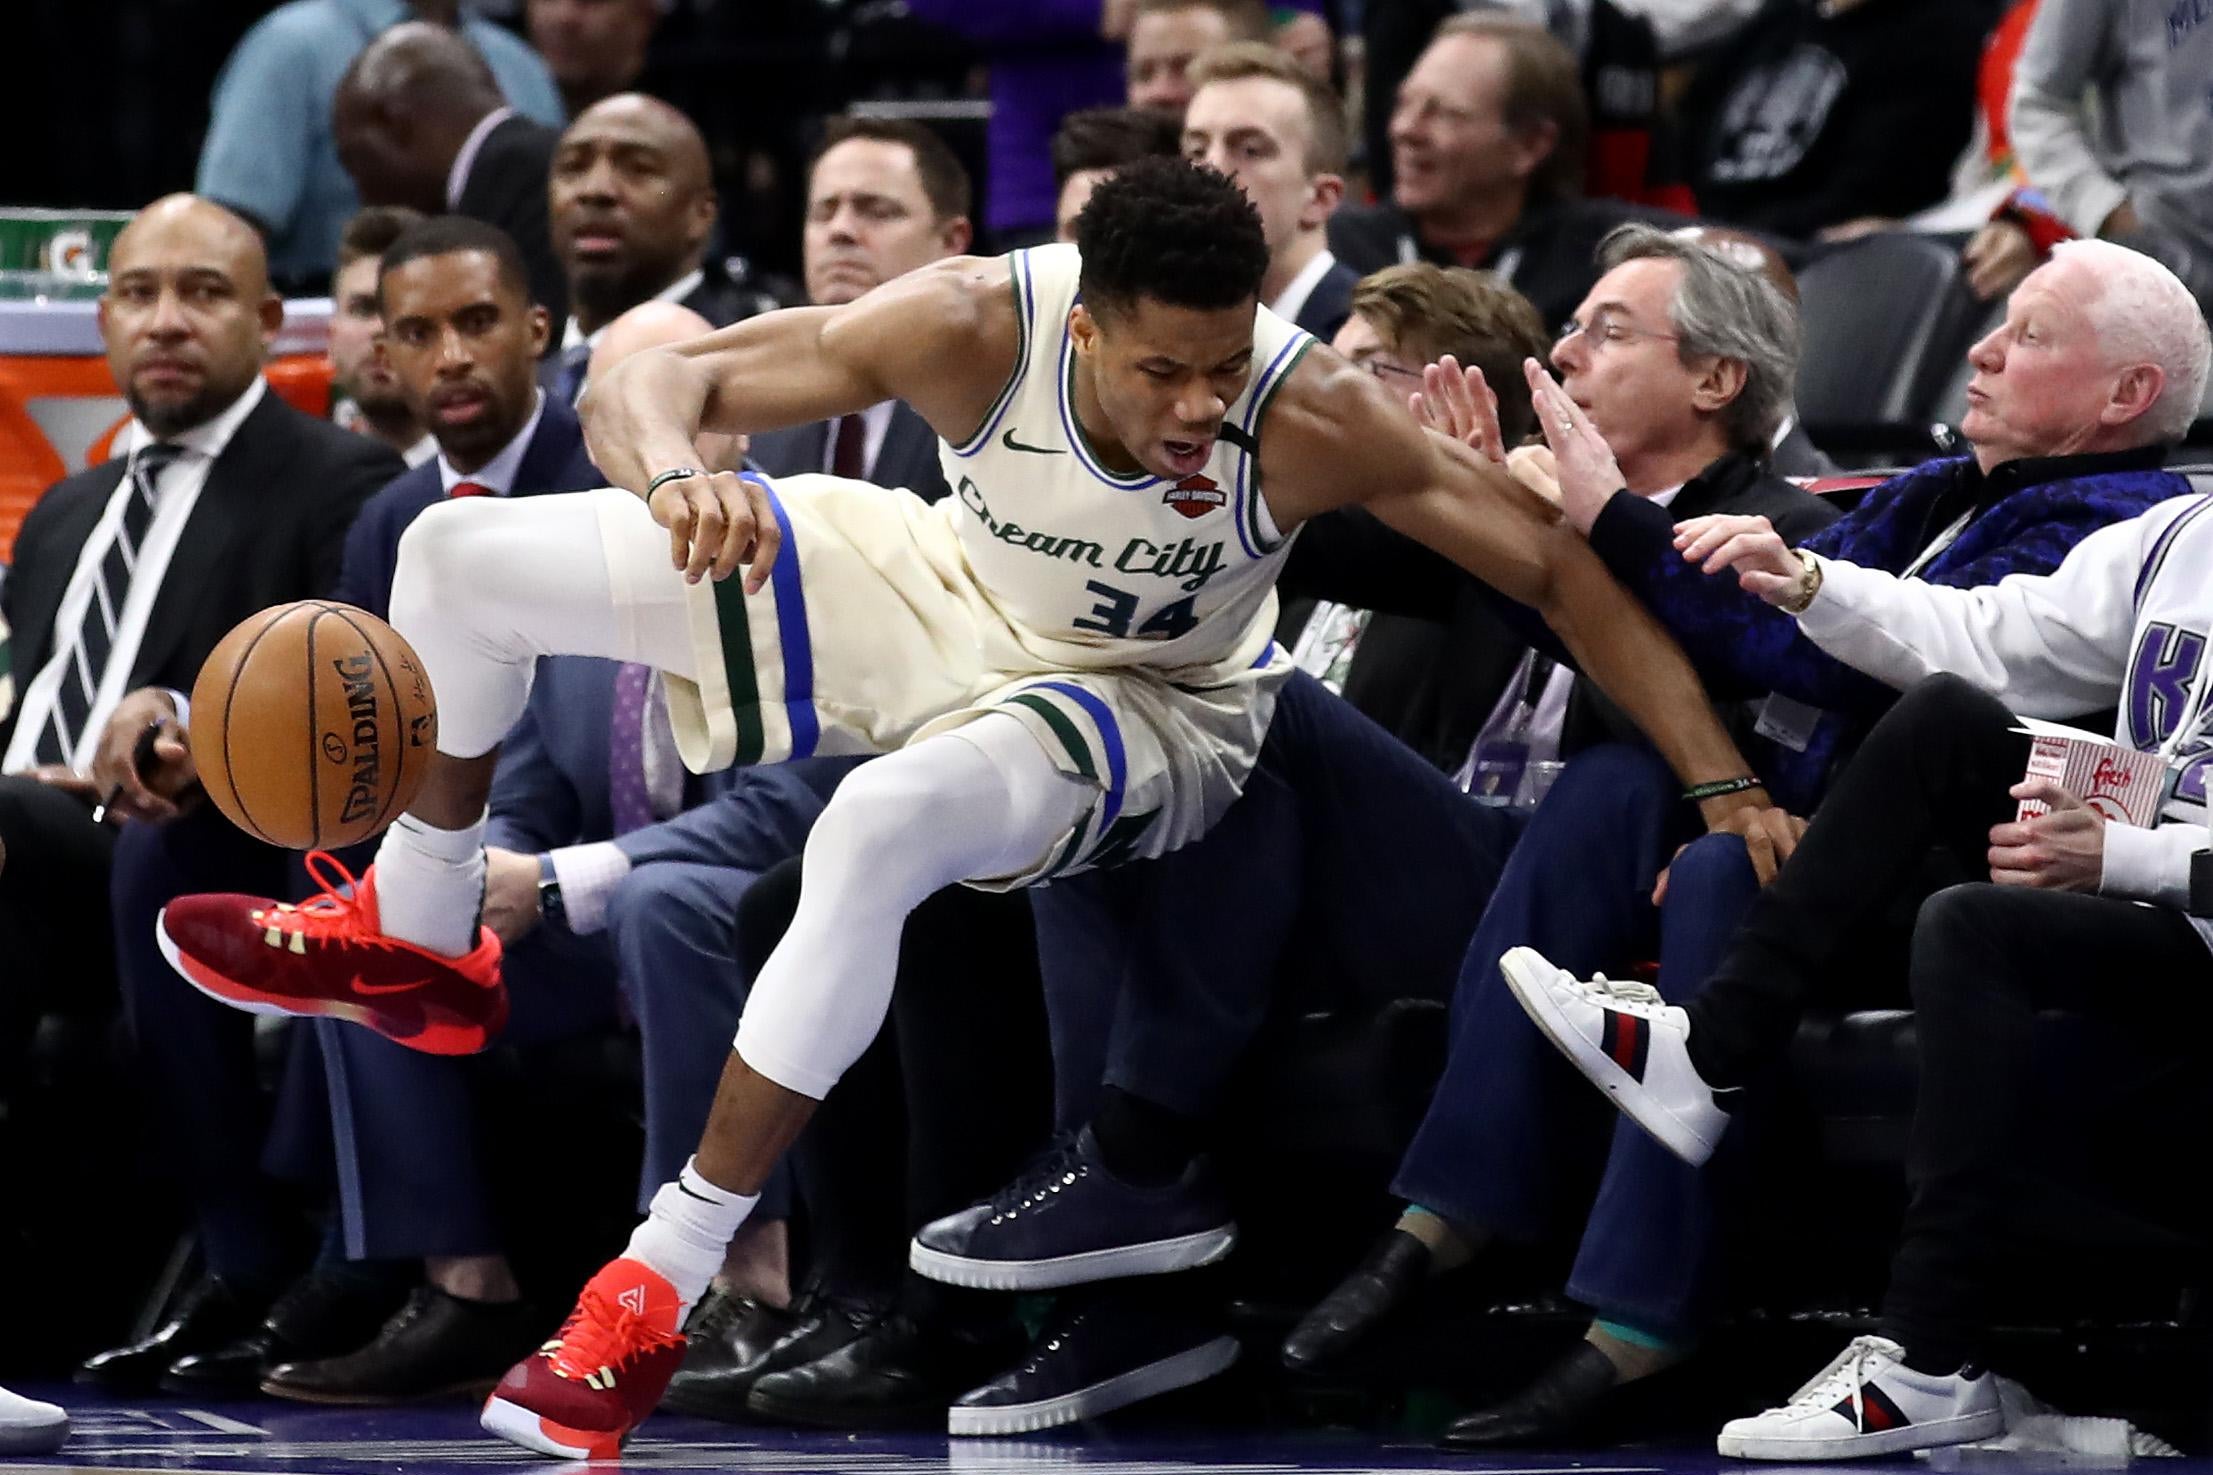 Giannis Antetokounmpo falls into the crowd during a game in January in Sacramento.